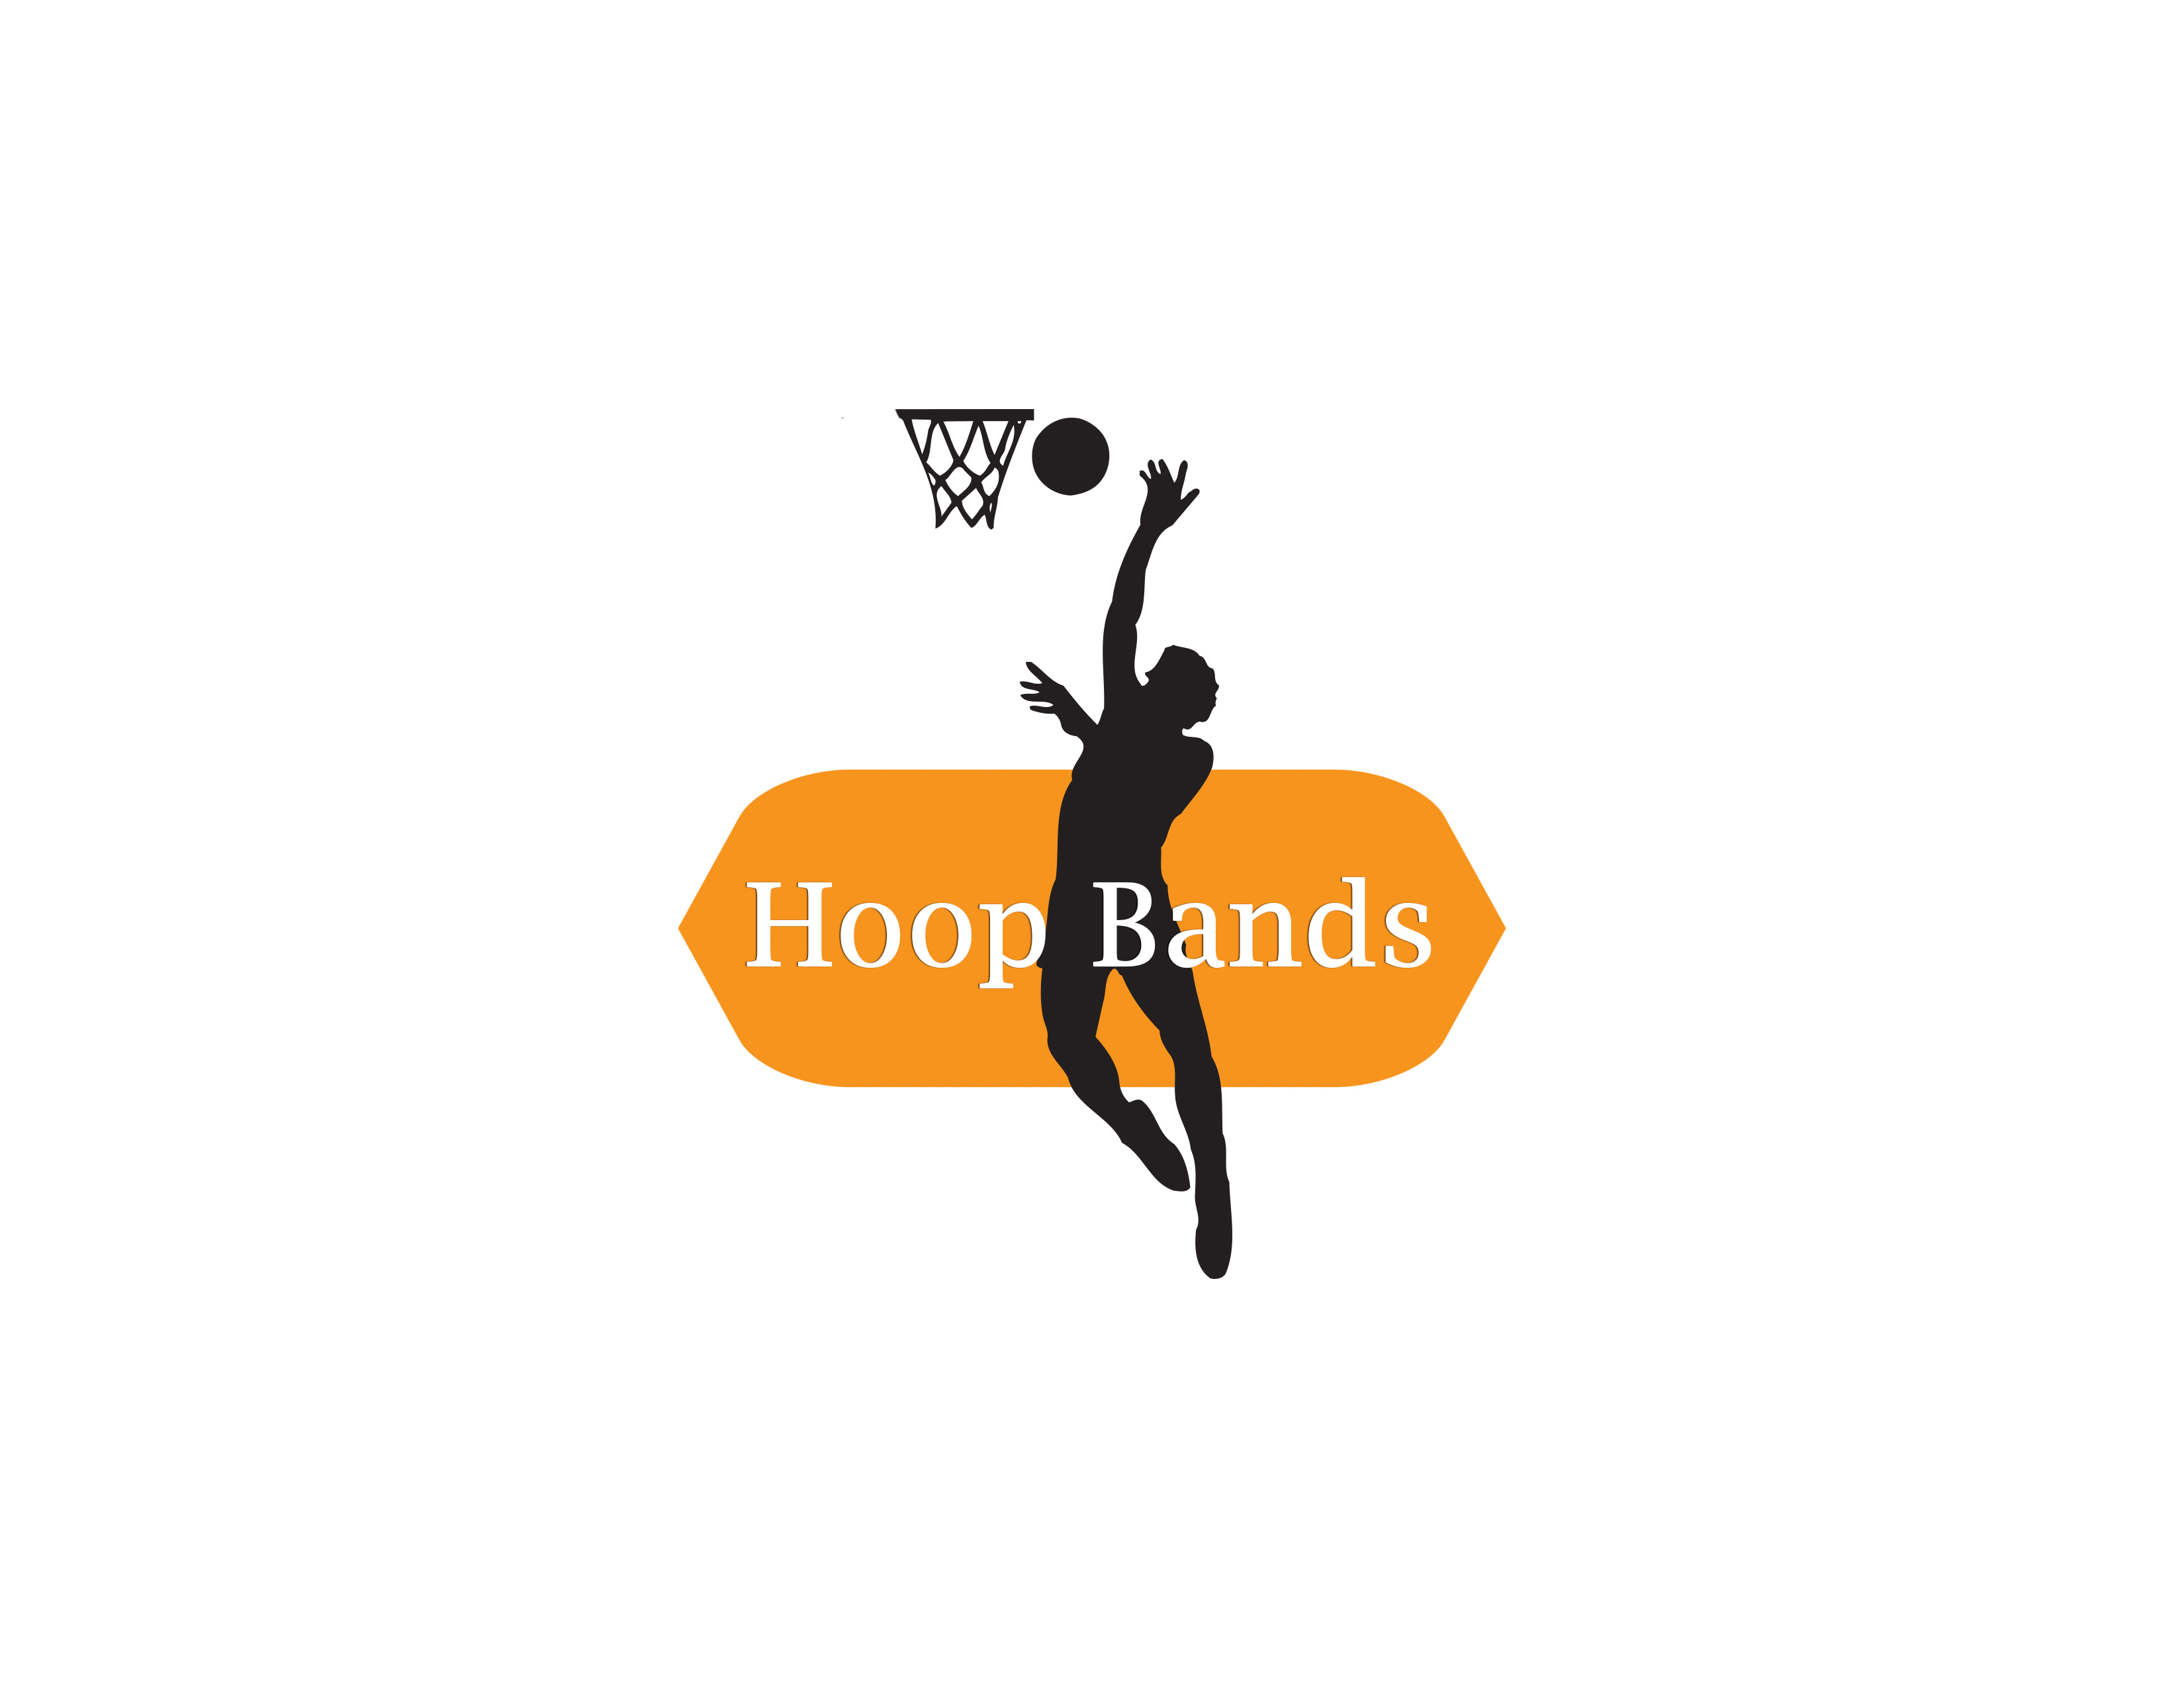 Hoop Bands is a sports invention created to improve an athlete’s basketball rebounding skills